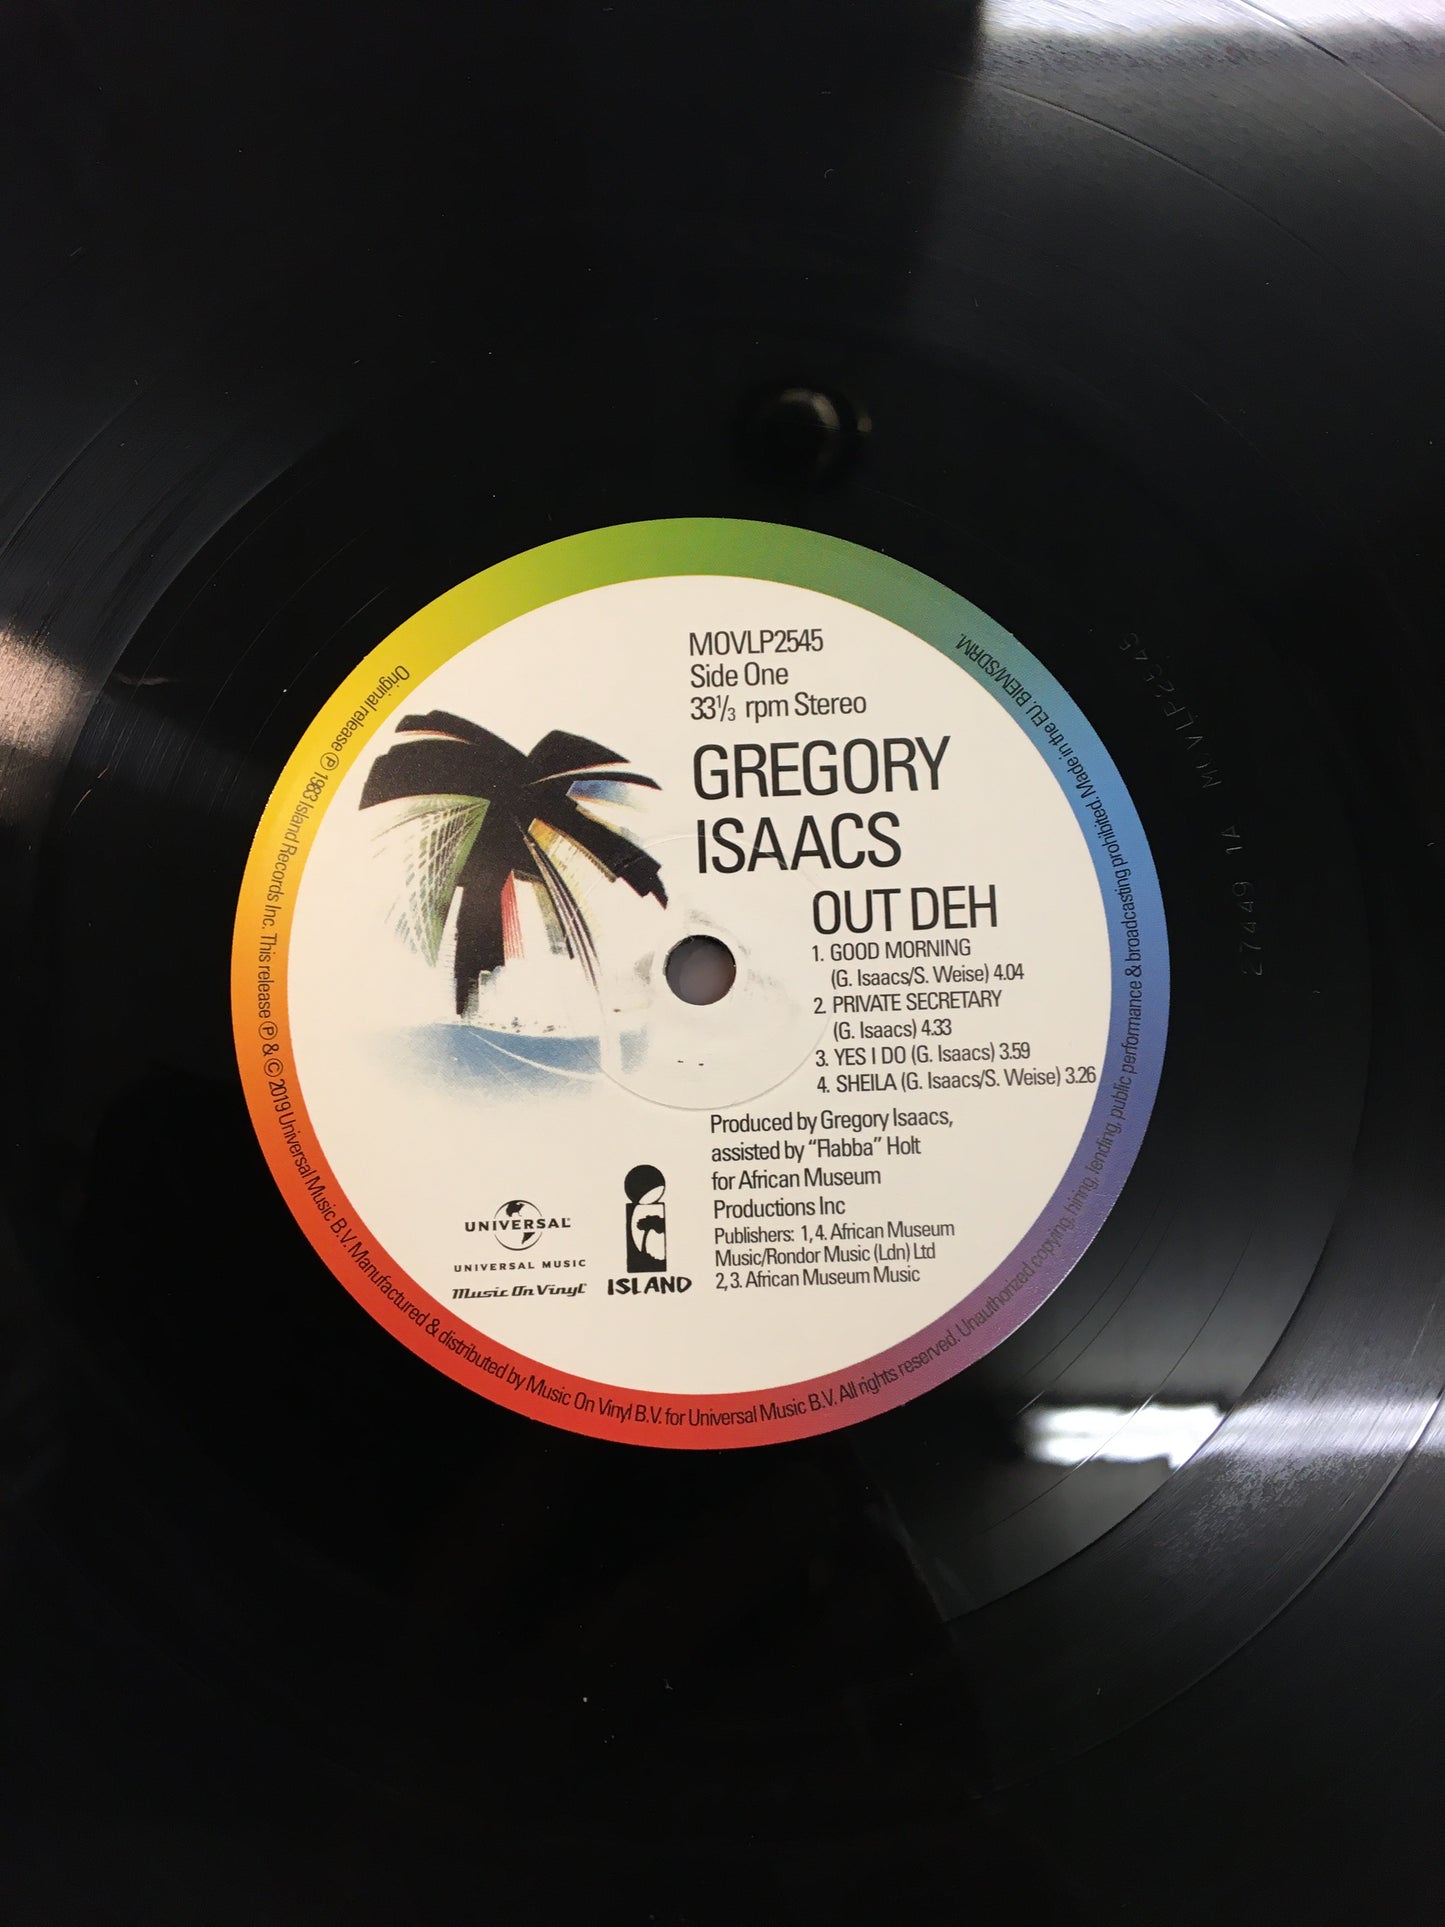 GREGORY ISACCS LP ; OUT DEH!